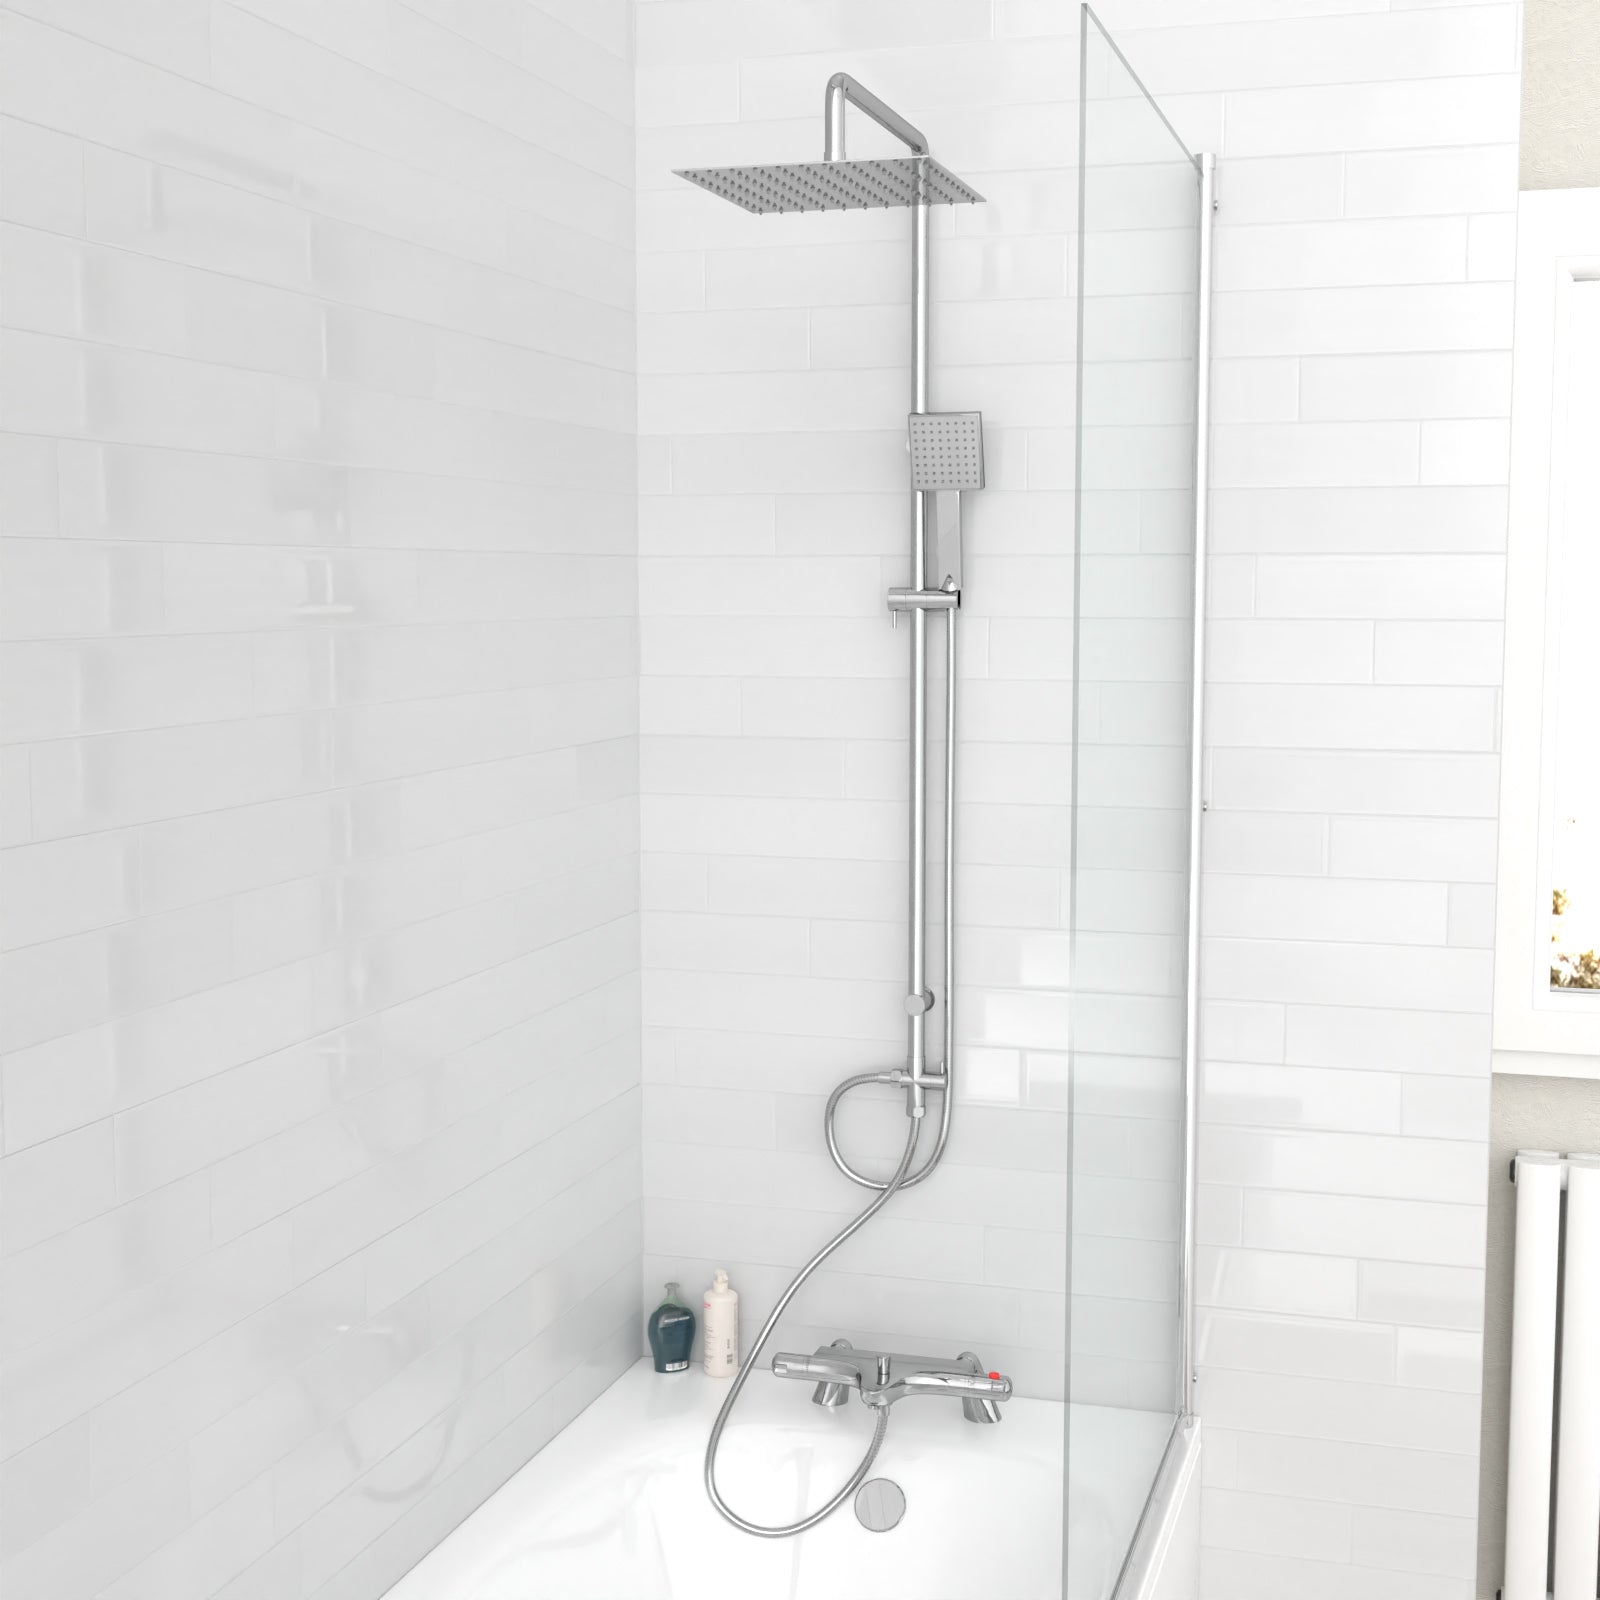 Walton Exposed Square Shower, Safety Button Thermostatic Mixer Tap, Handset & Riser Rail Kit